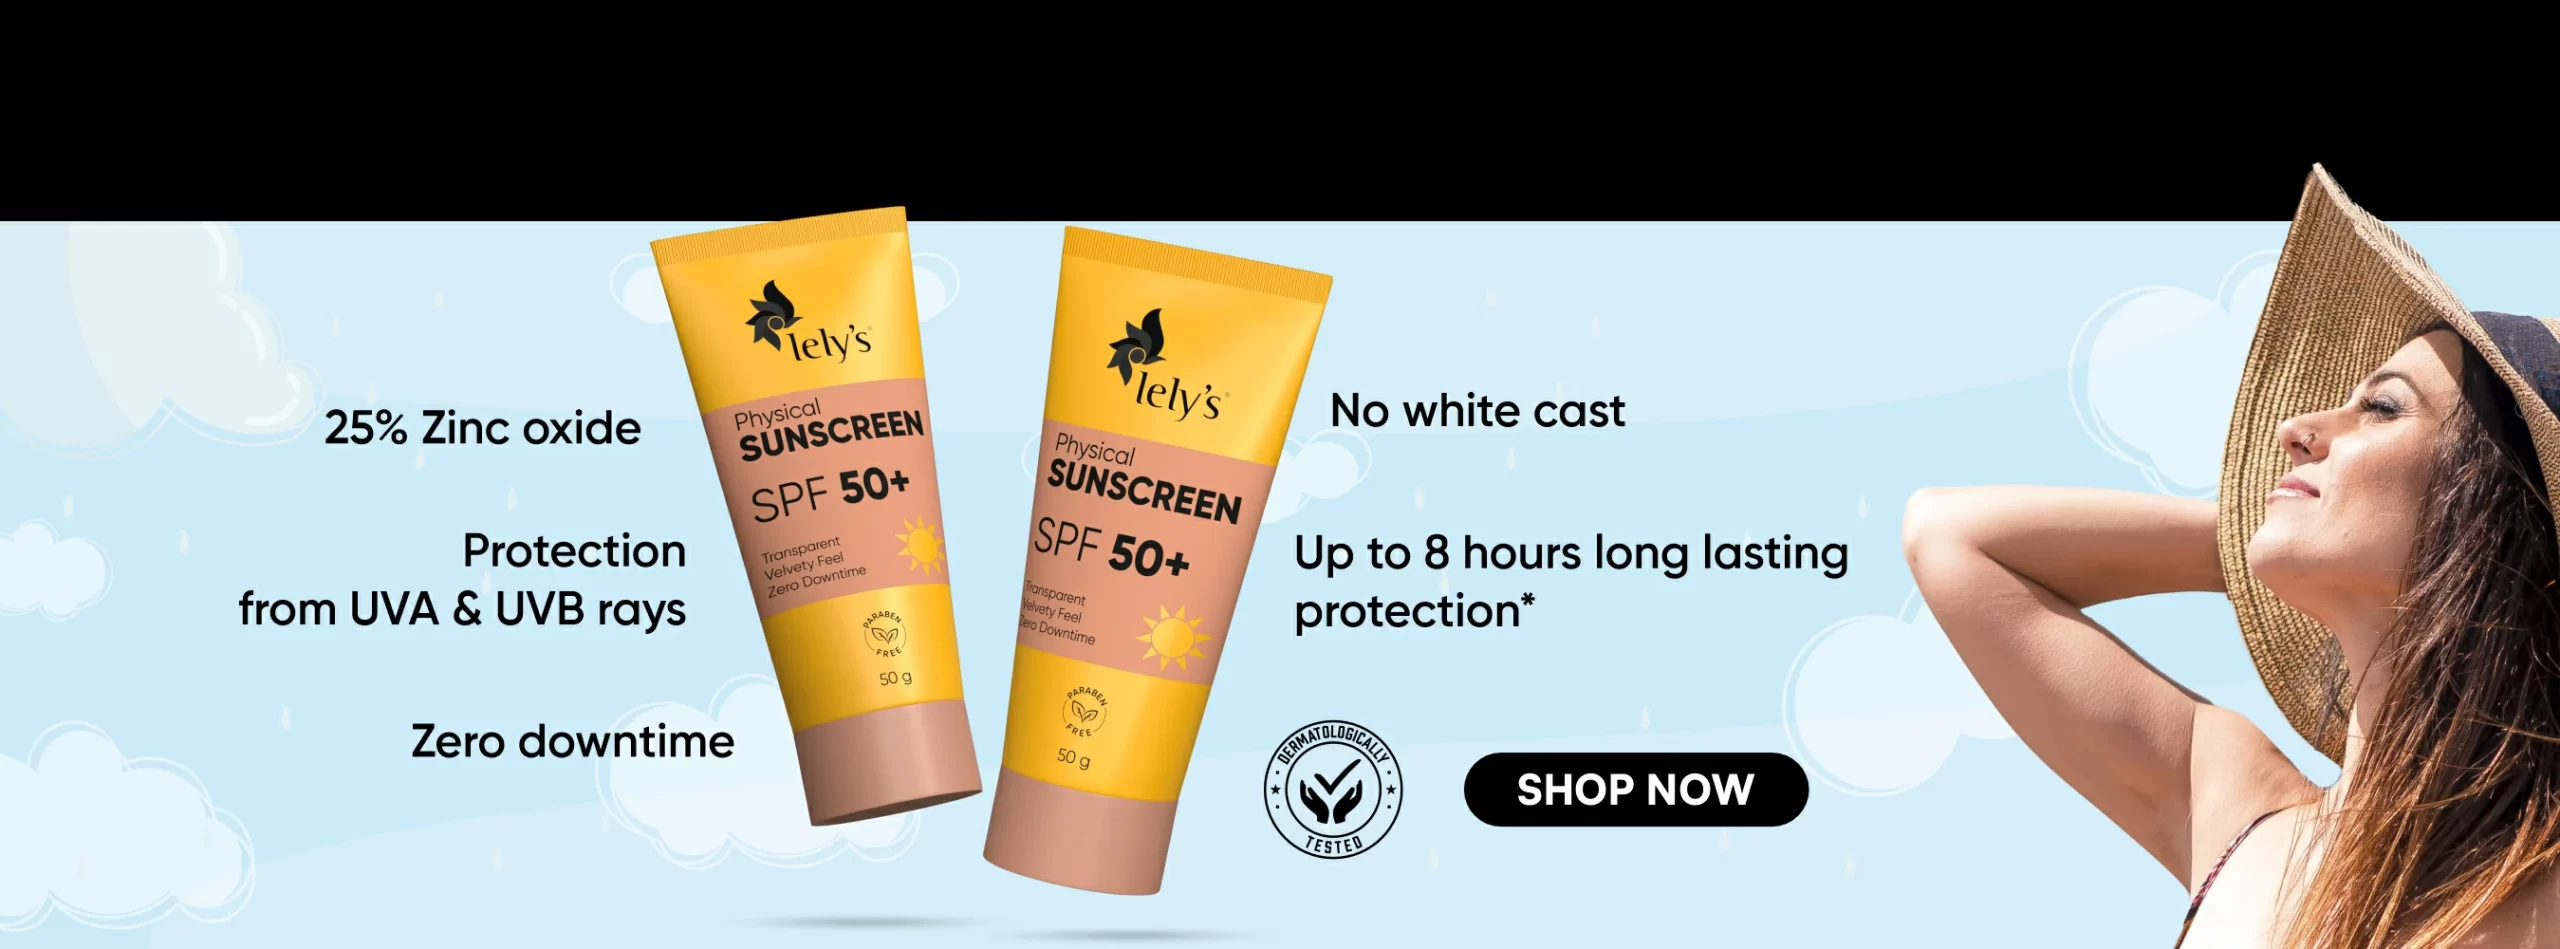 Physical Sunscreen at 25% off